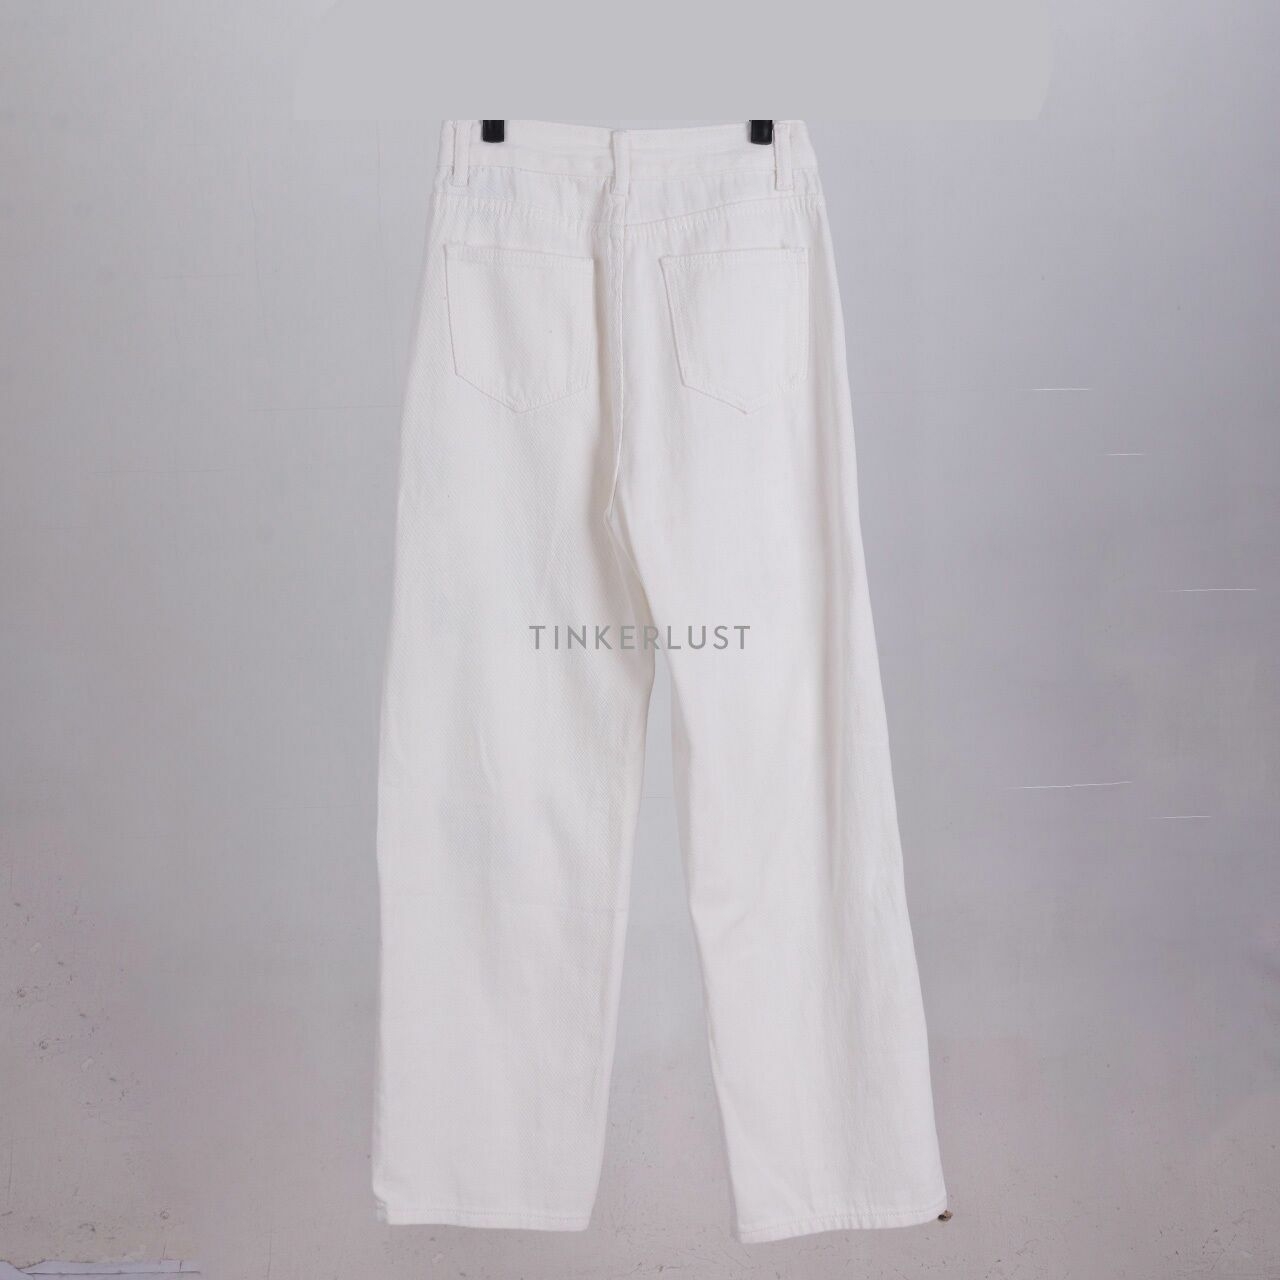 Private Collection Naruto White Jeans Long Pants